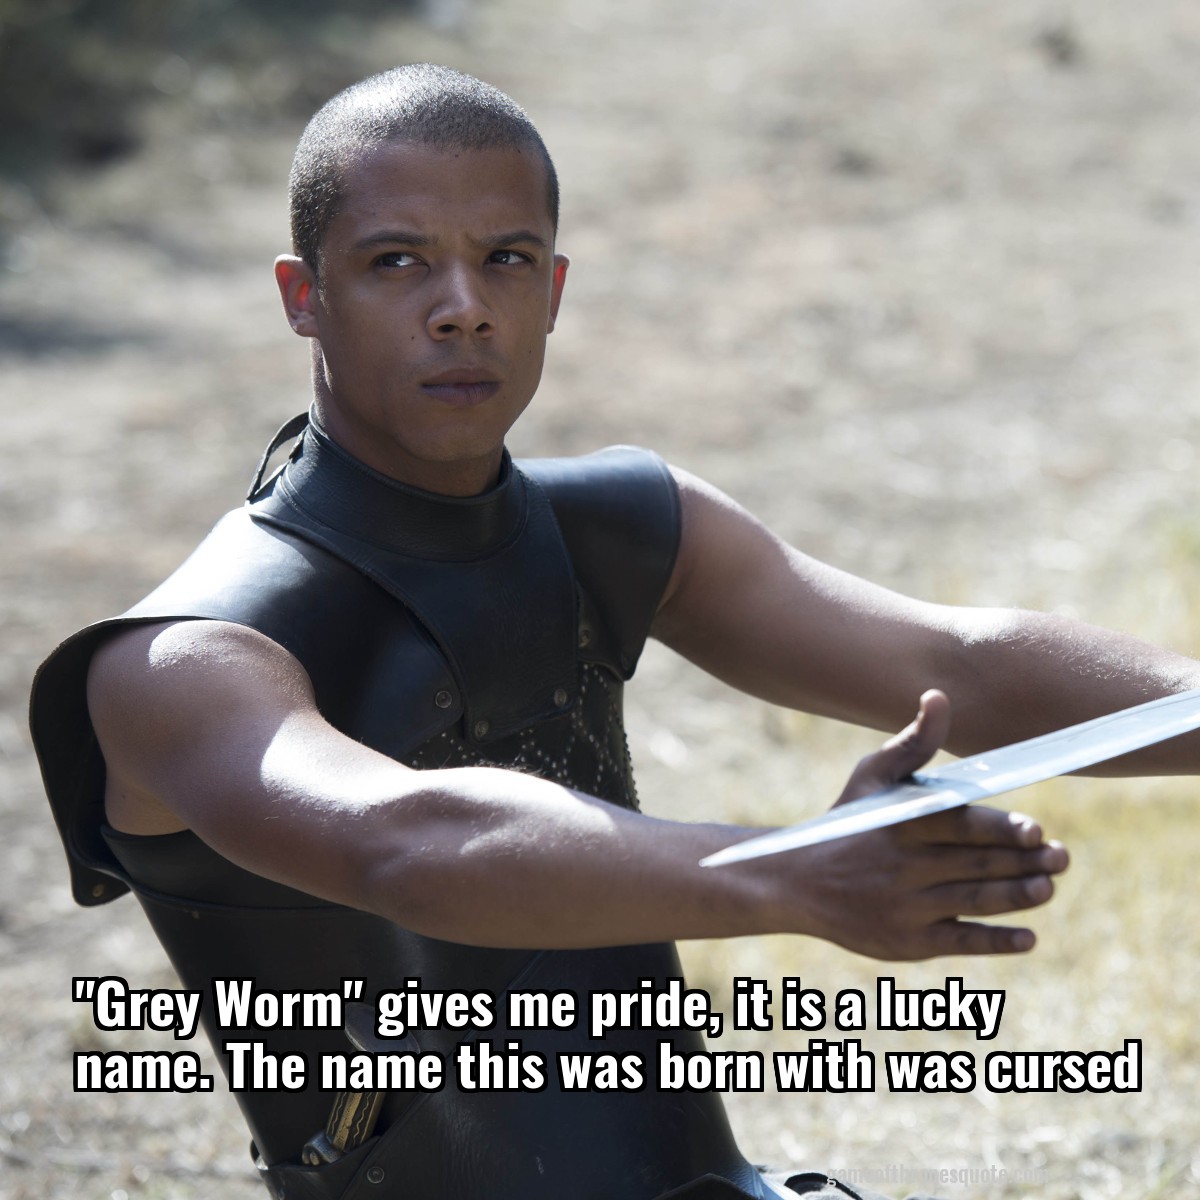 "Grey Worm" gives me pride, it is a lucky name. The name this was born with was cursed